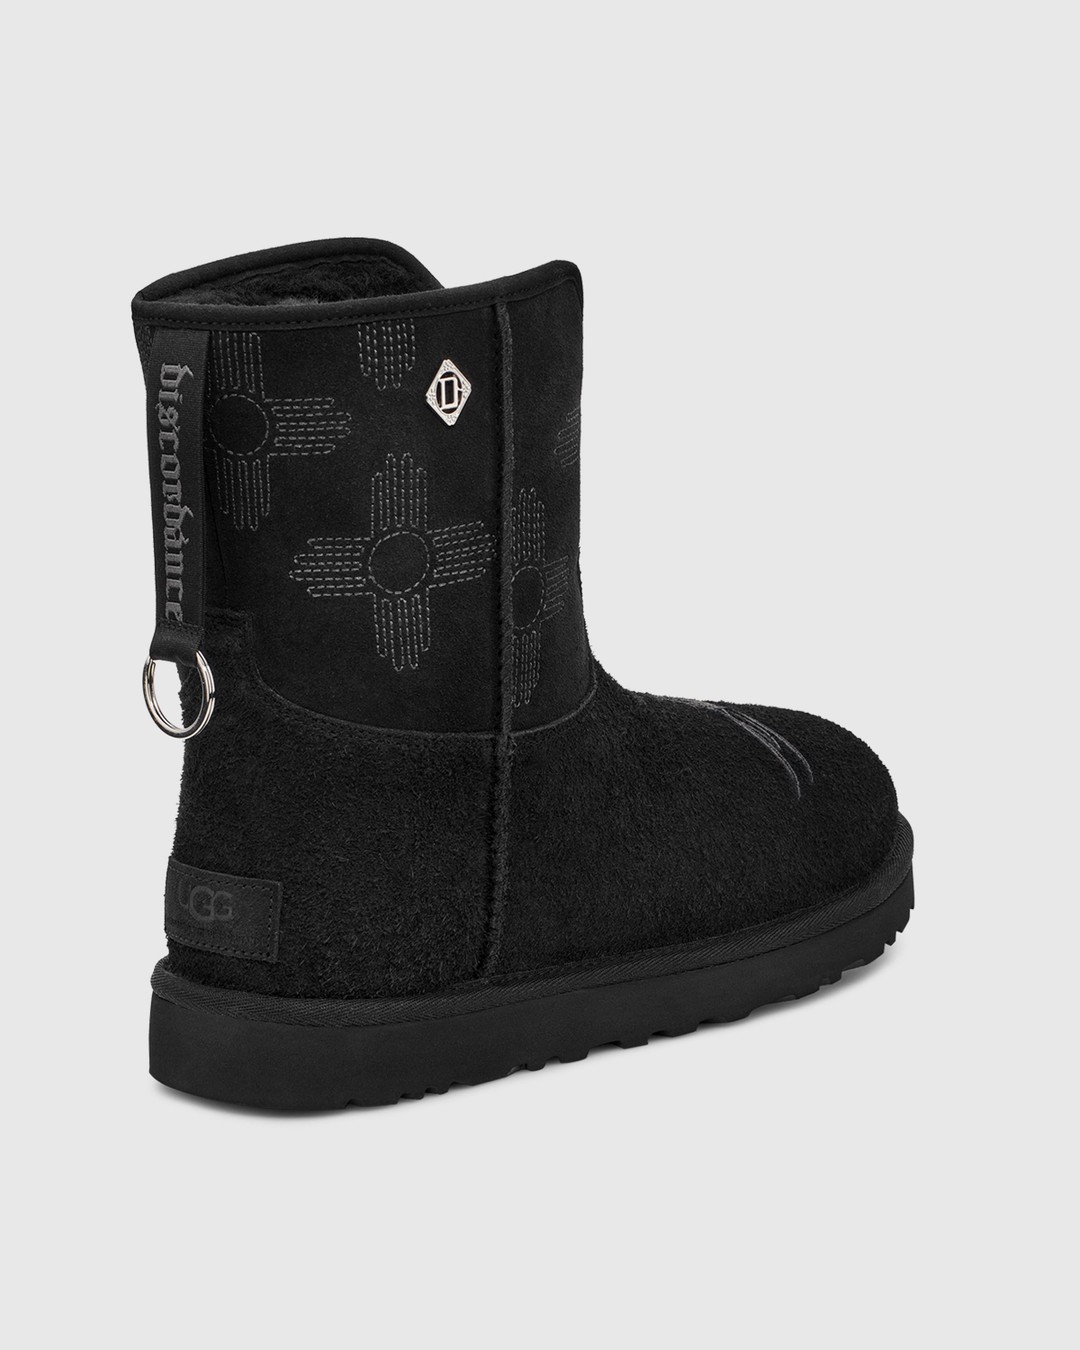 Ugg x Children of the Discordance – Classic Short Boot Black - Lined Boots - Black - Image 4